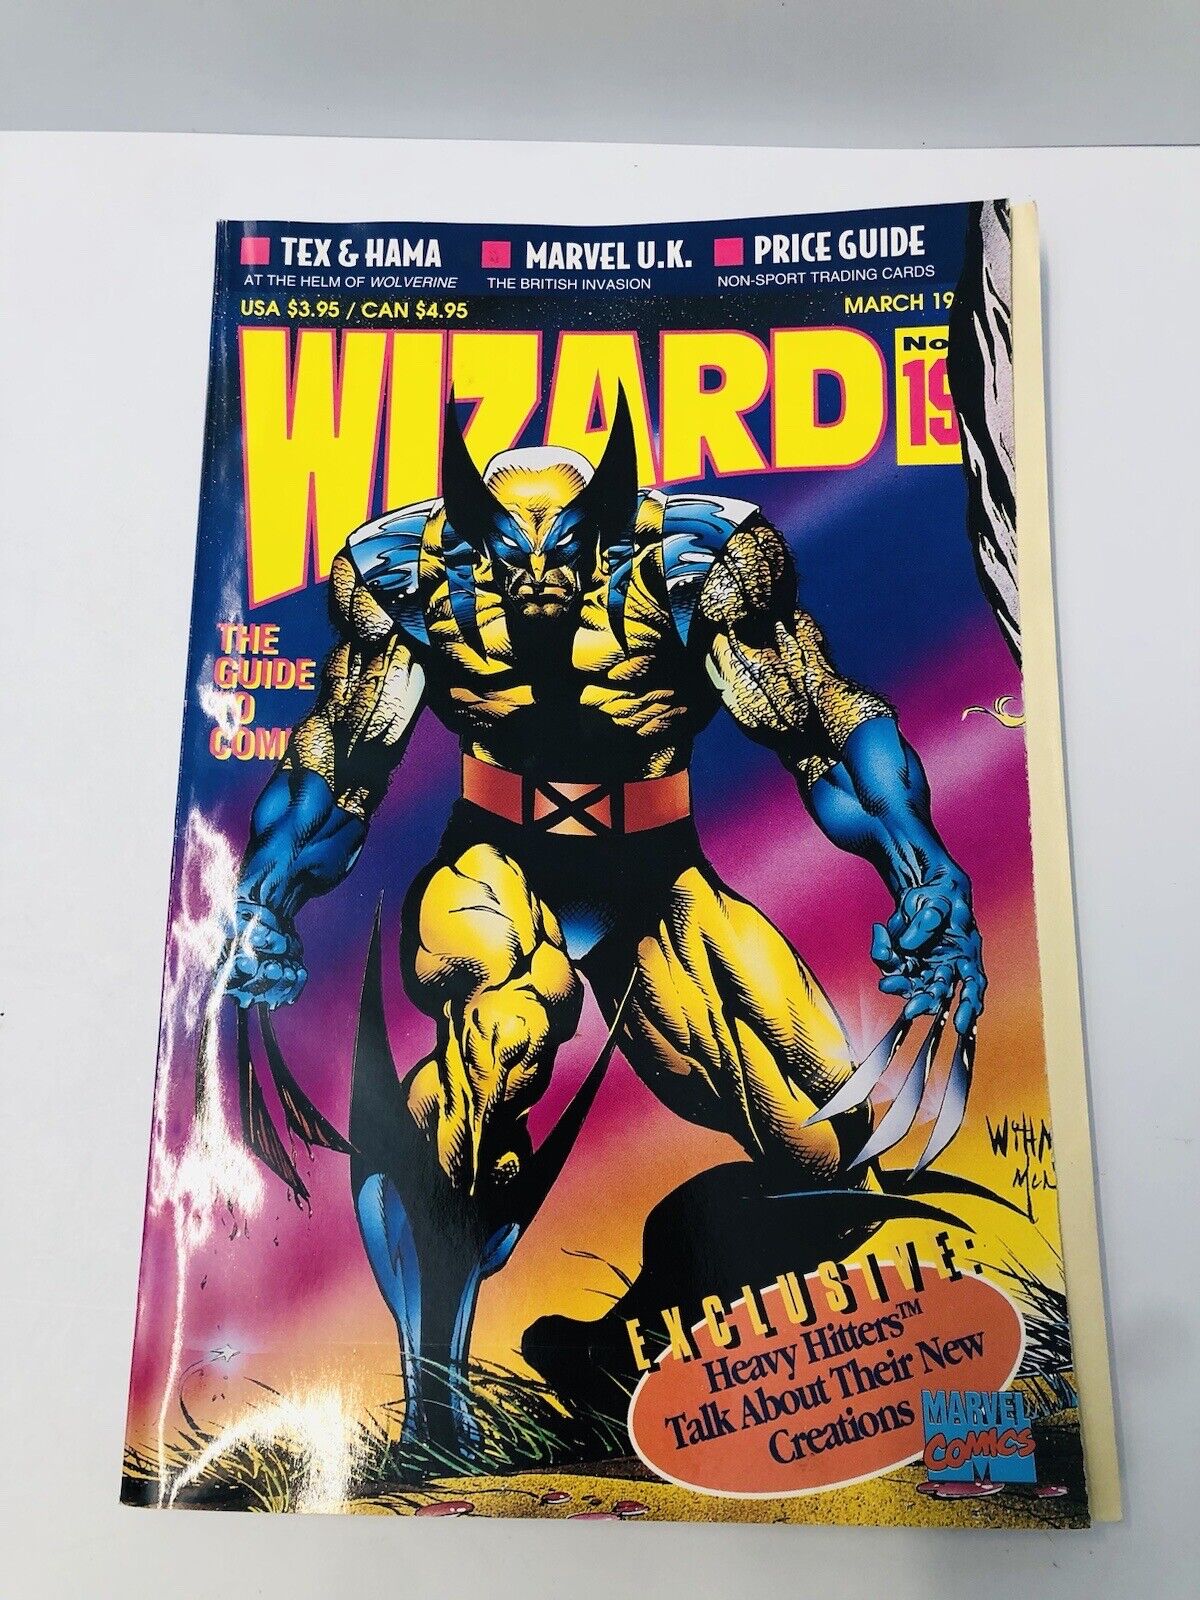 WIZARD MAGAZINE THE GUIDE TO COMICS Volume 1 #19 March 1993